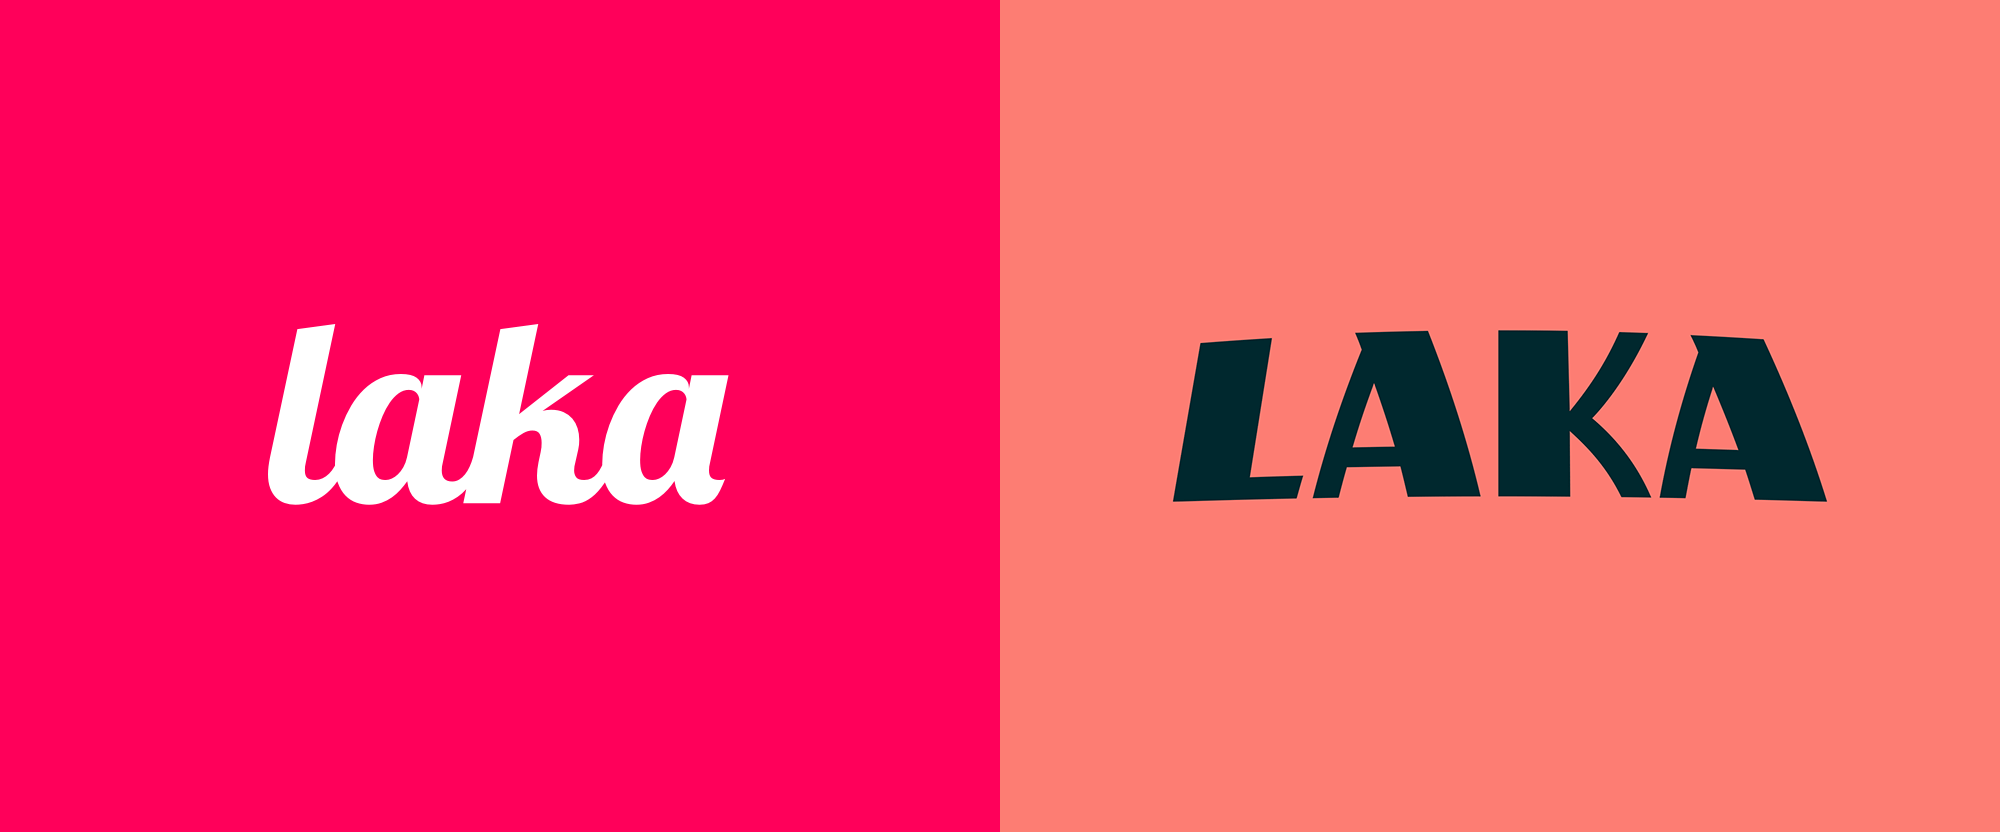 New Logo and Identity for Laka by Ragged Edge